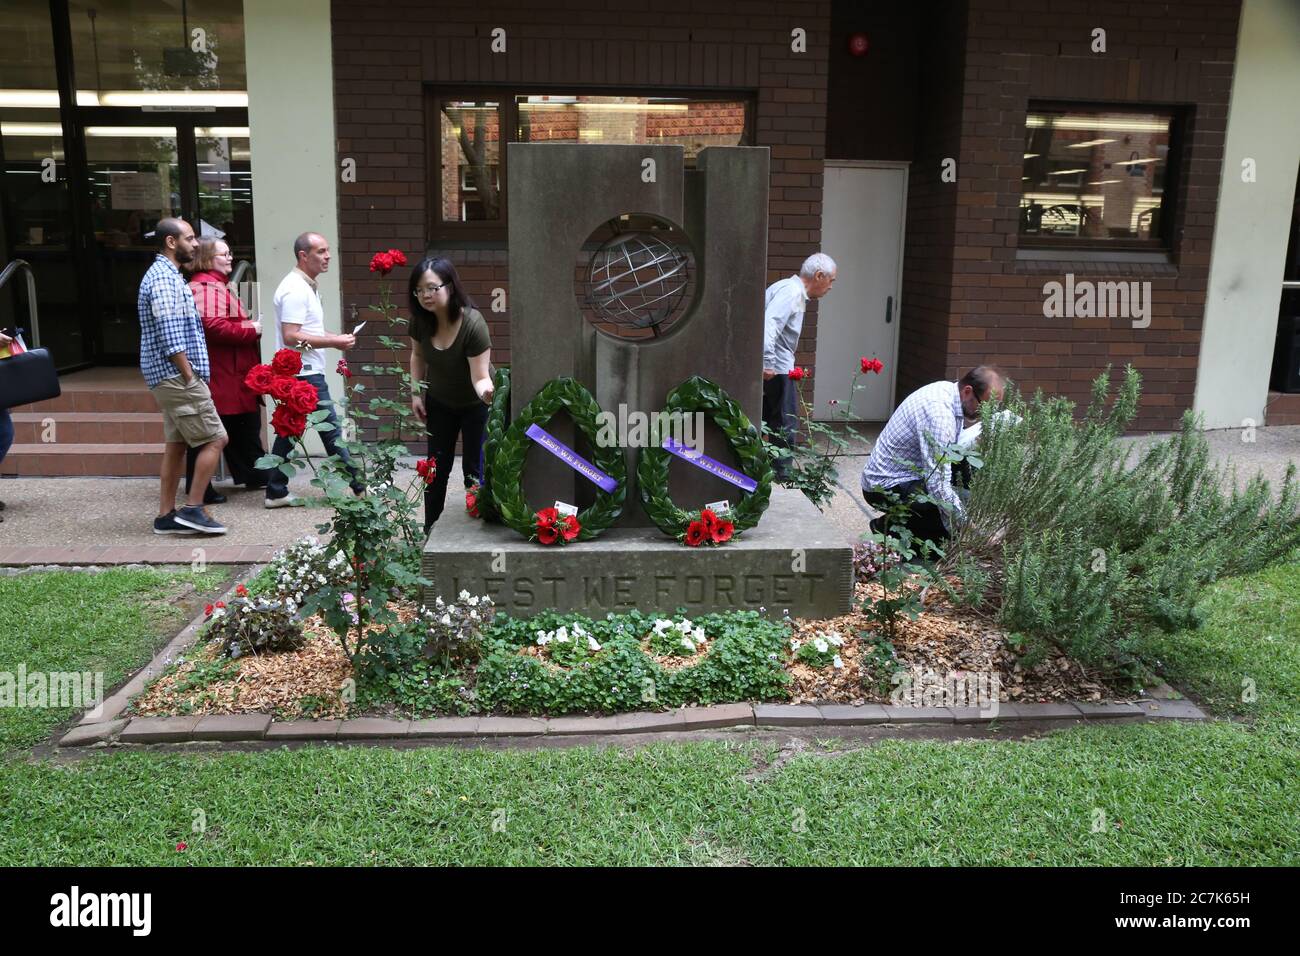 Wreaths are laid and people take photos at the memorial at the end of the traditional Remembrance Day service at Ultimo TAFE in Sydney. Stock Photo